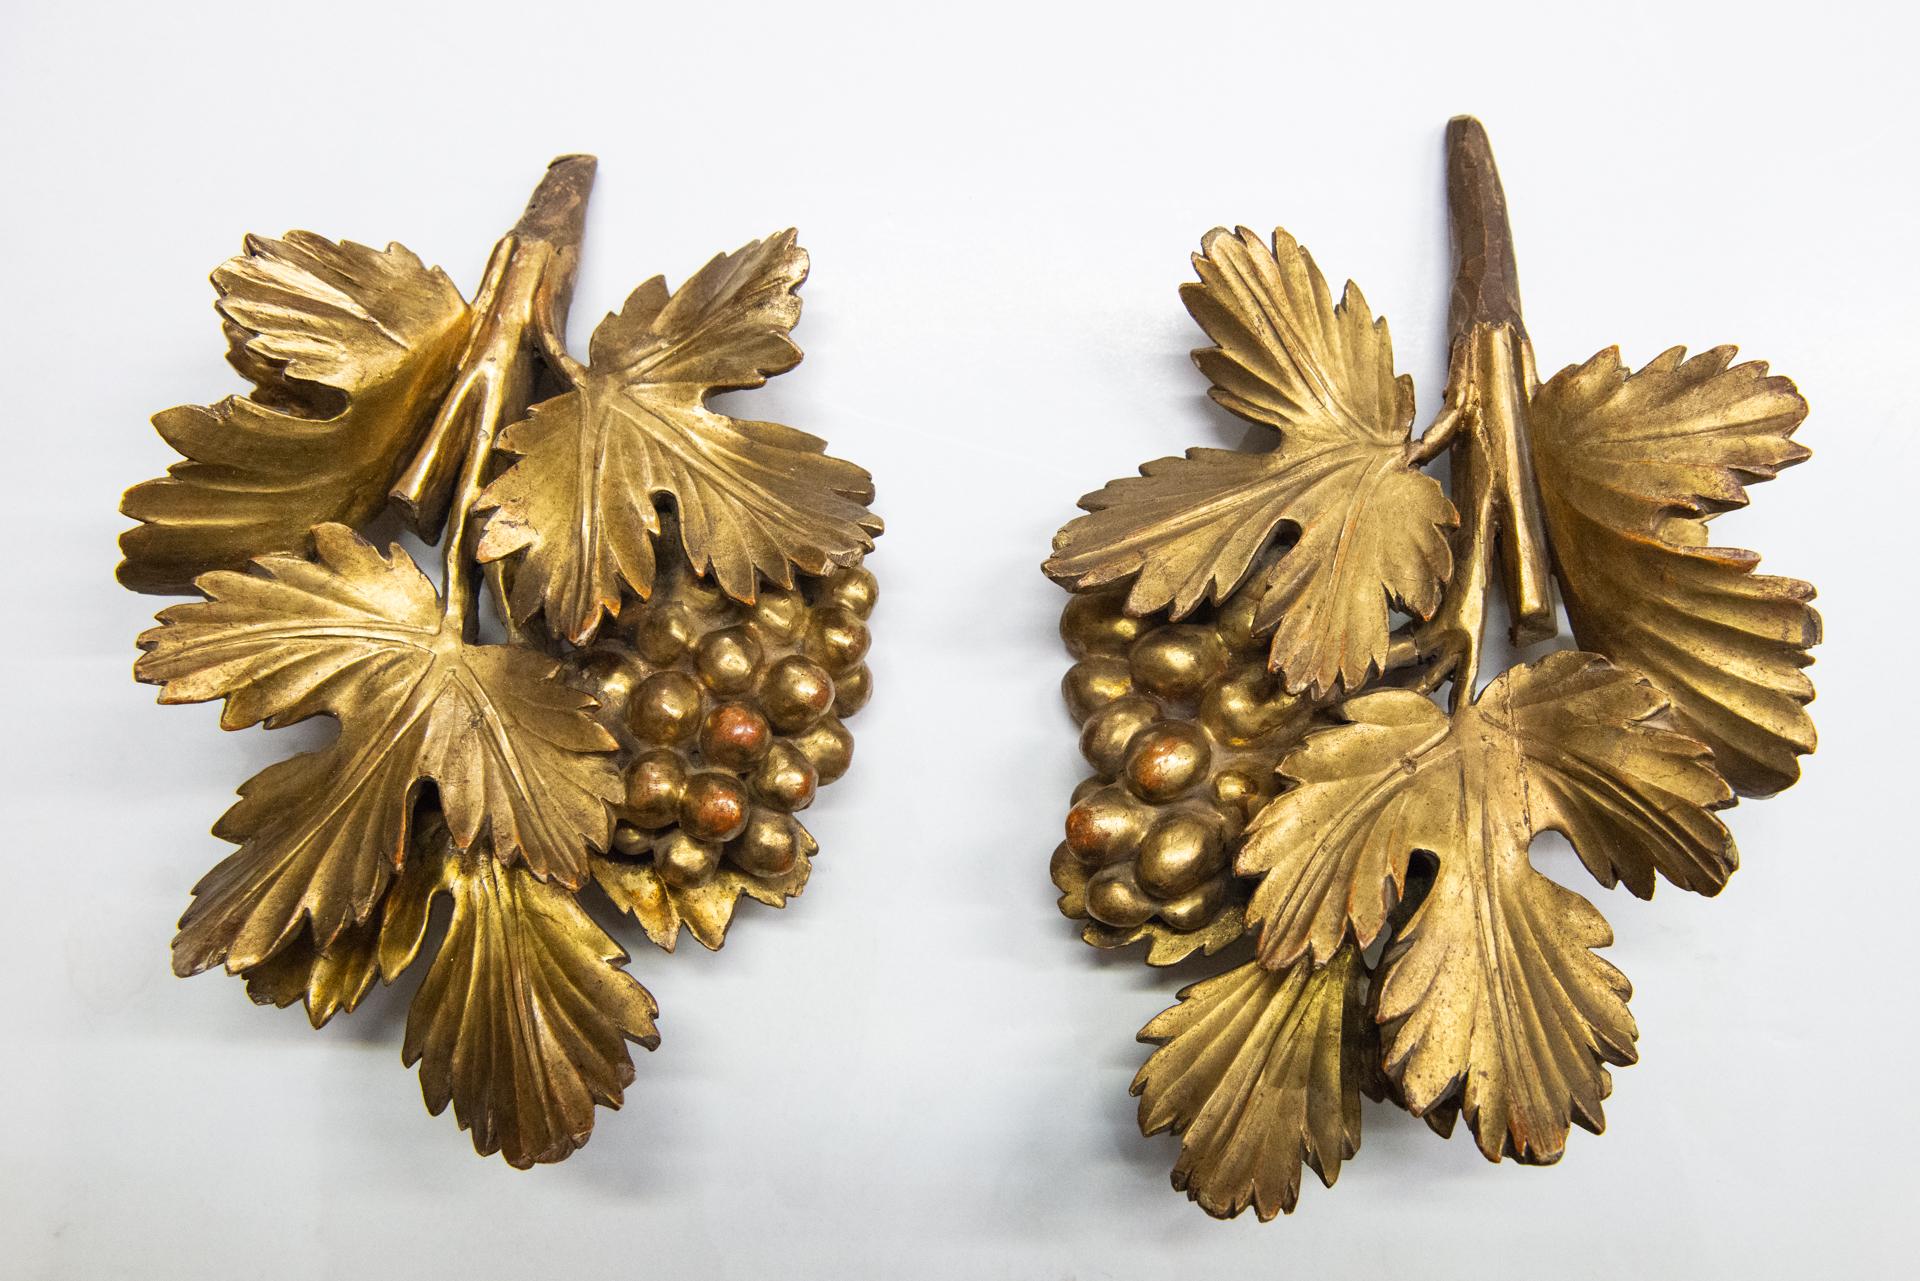 Rare pair of antique freezes with grapes in gilded wood: very beautiful. Probably they were part of some large mirror that broke, who knows where, when and how.